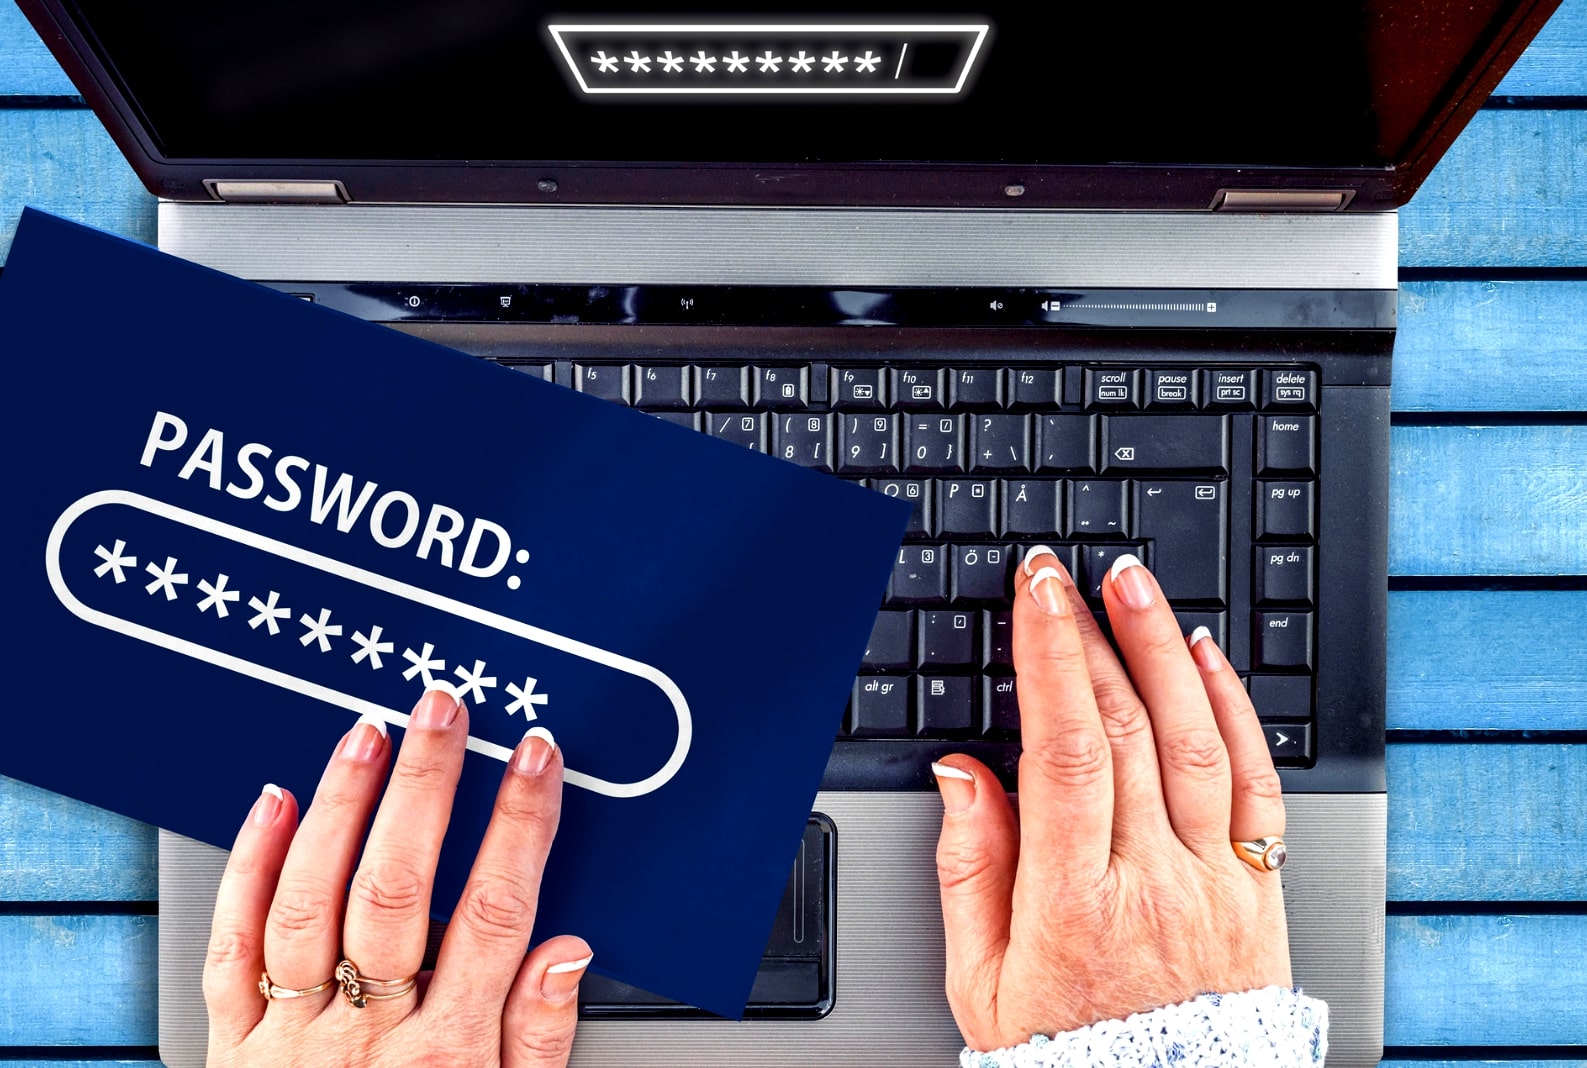 Why Is It So Difficult when Managing Passwords?